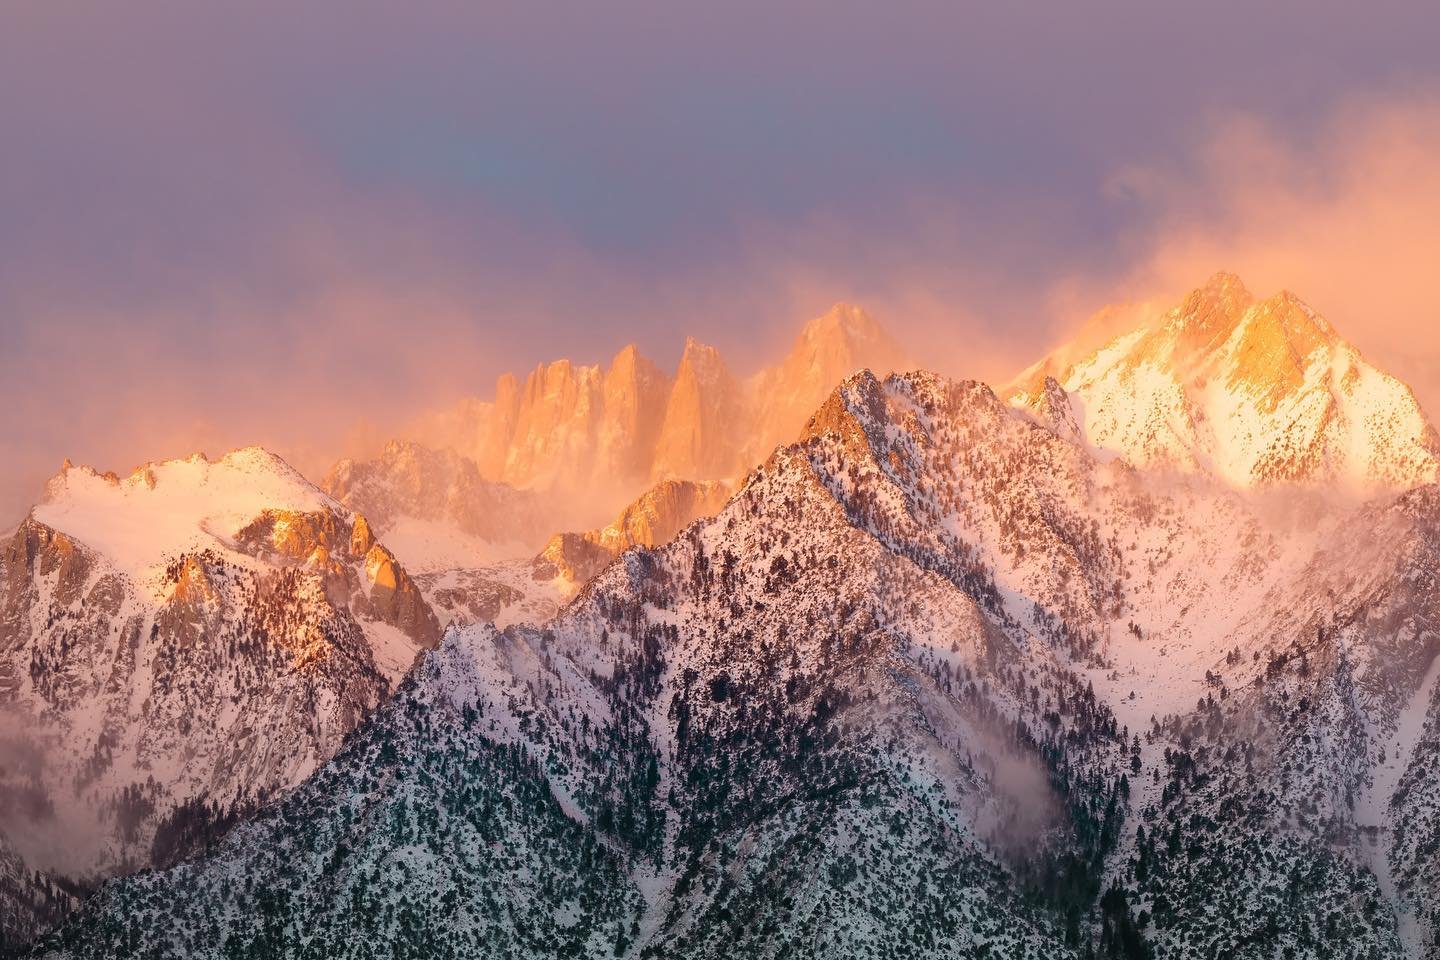 Mount Whitney on a very magical morning. After an overcast, rainy few days, the storm decided to move out creating quite a beautiful sunrise show.

Happy Earth Day! 🌎 

A group of photographers from @womencapturemagic have come together to share our